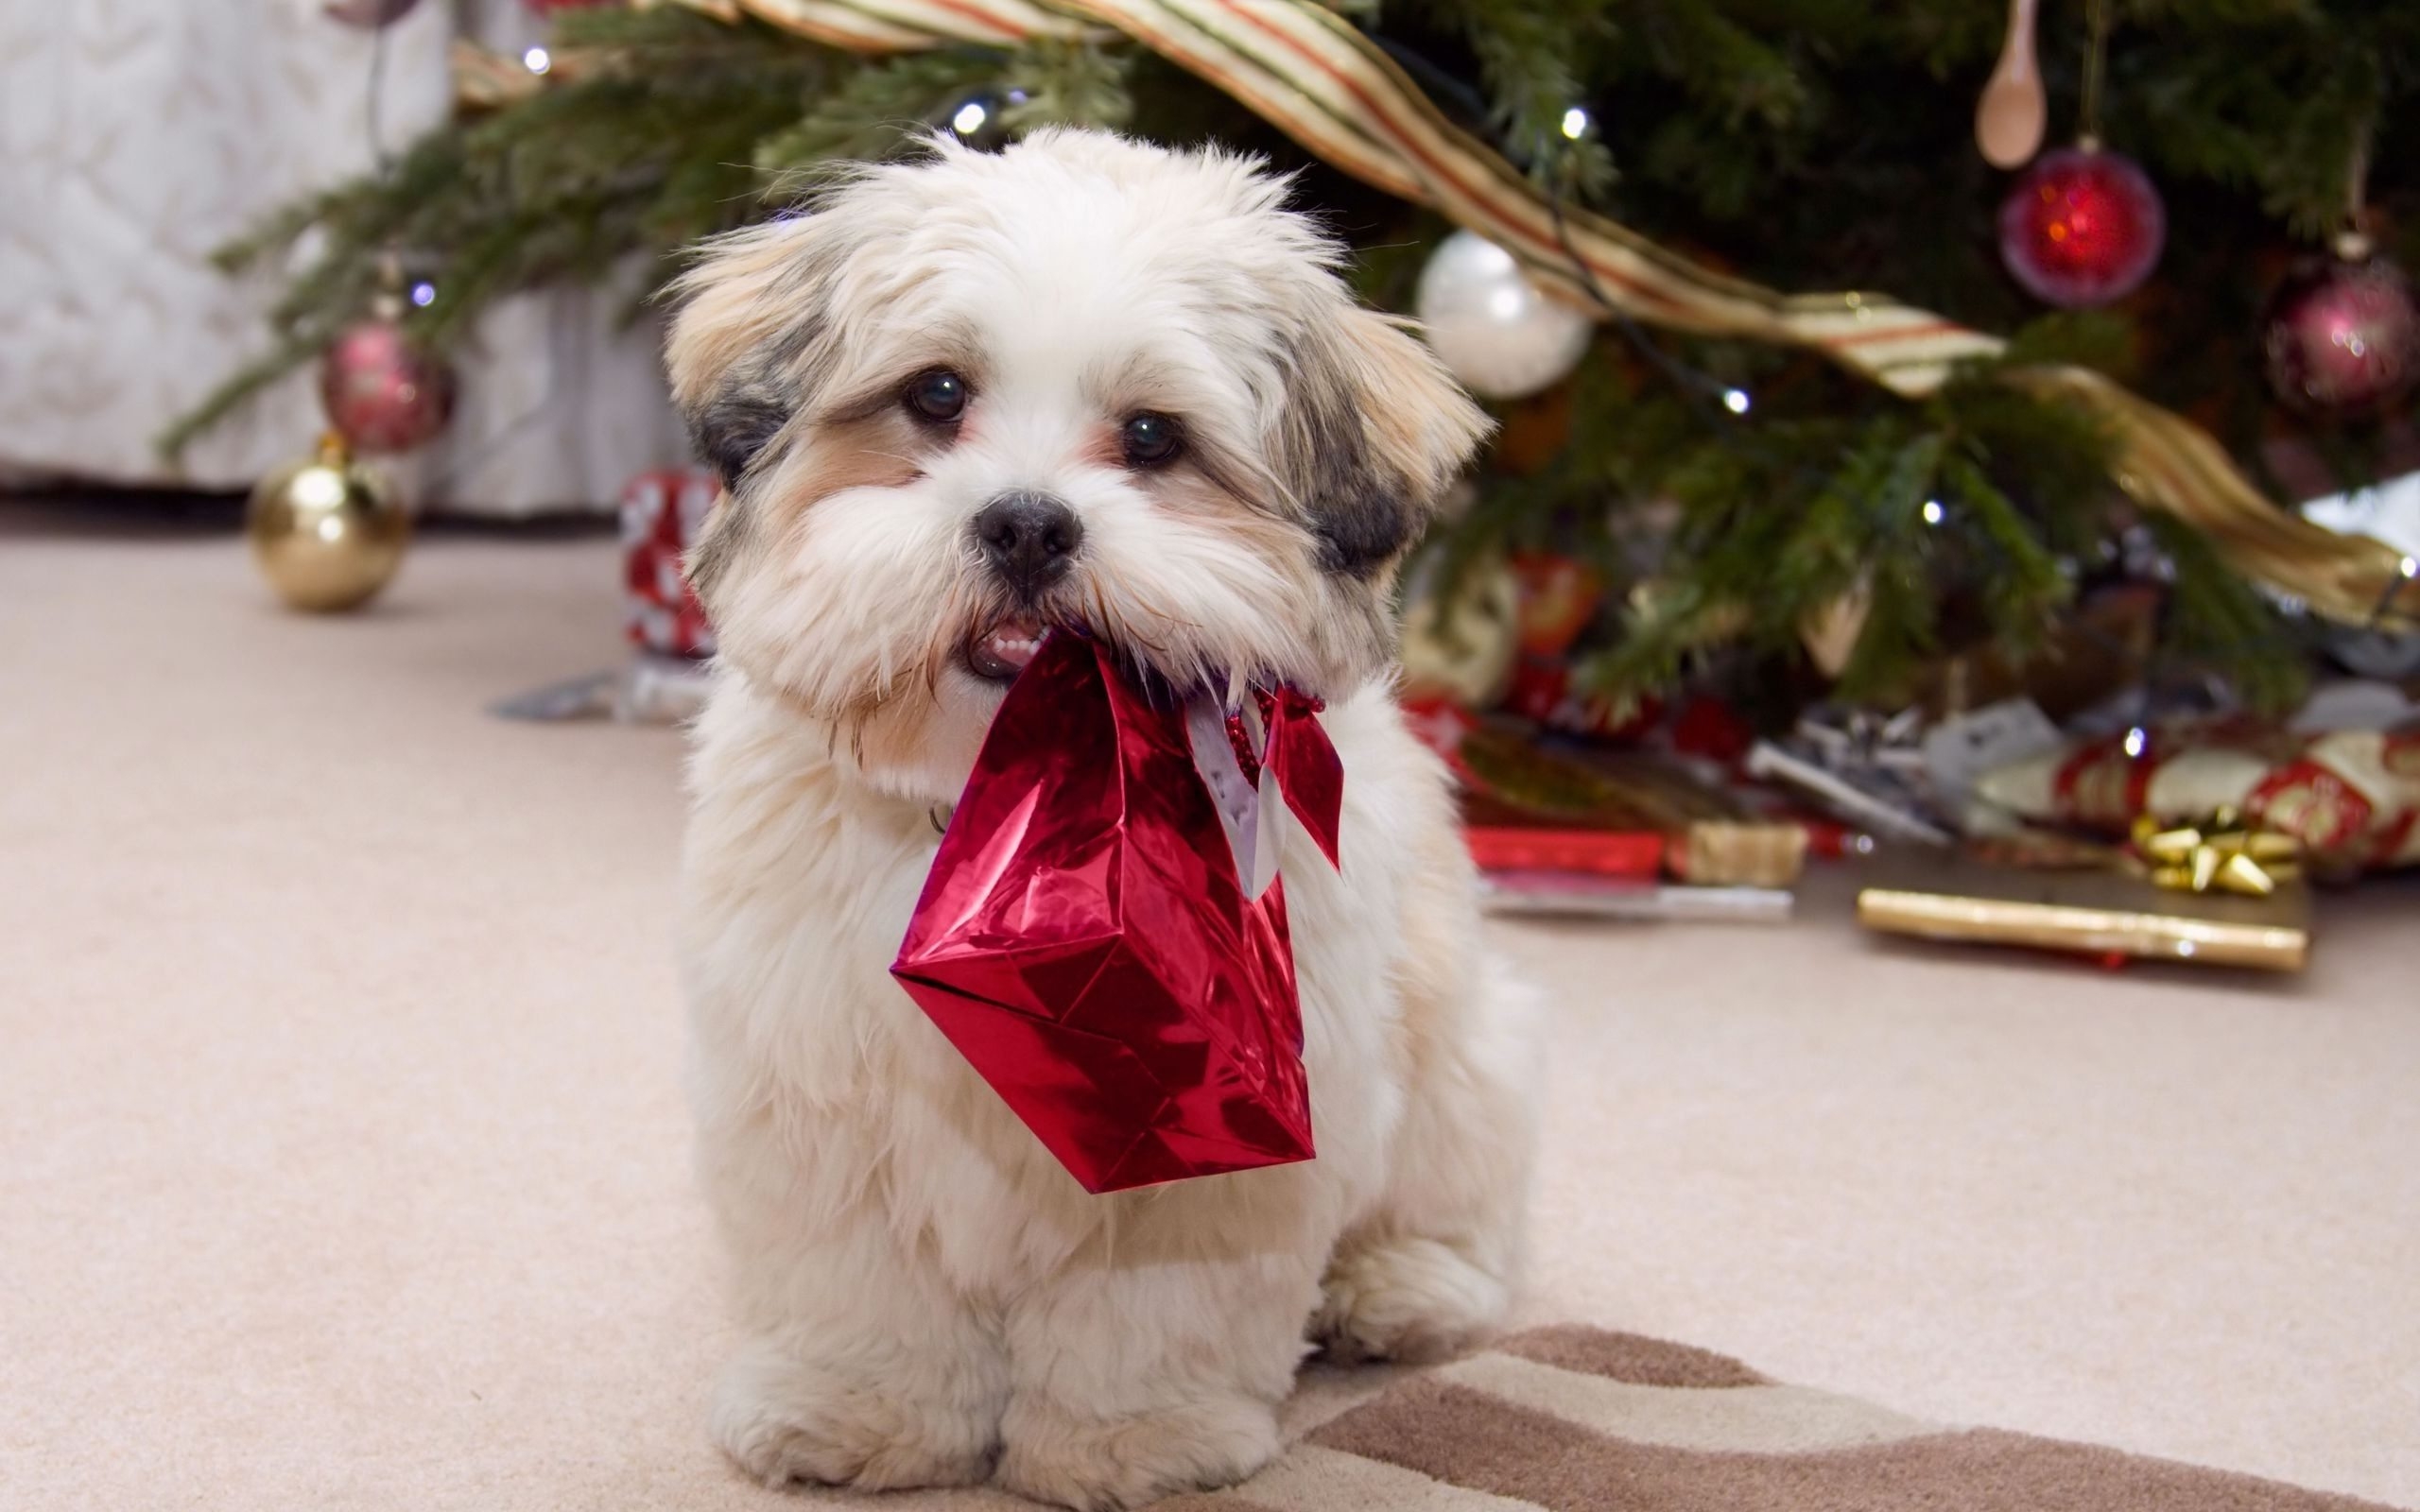 Shih Tzu Puppy On Christmas Day Very Cute Little And Playful